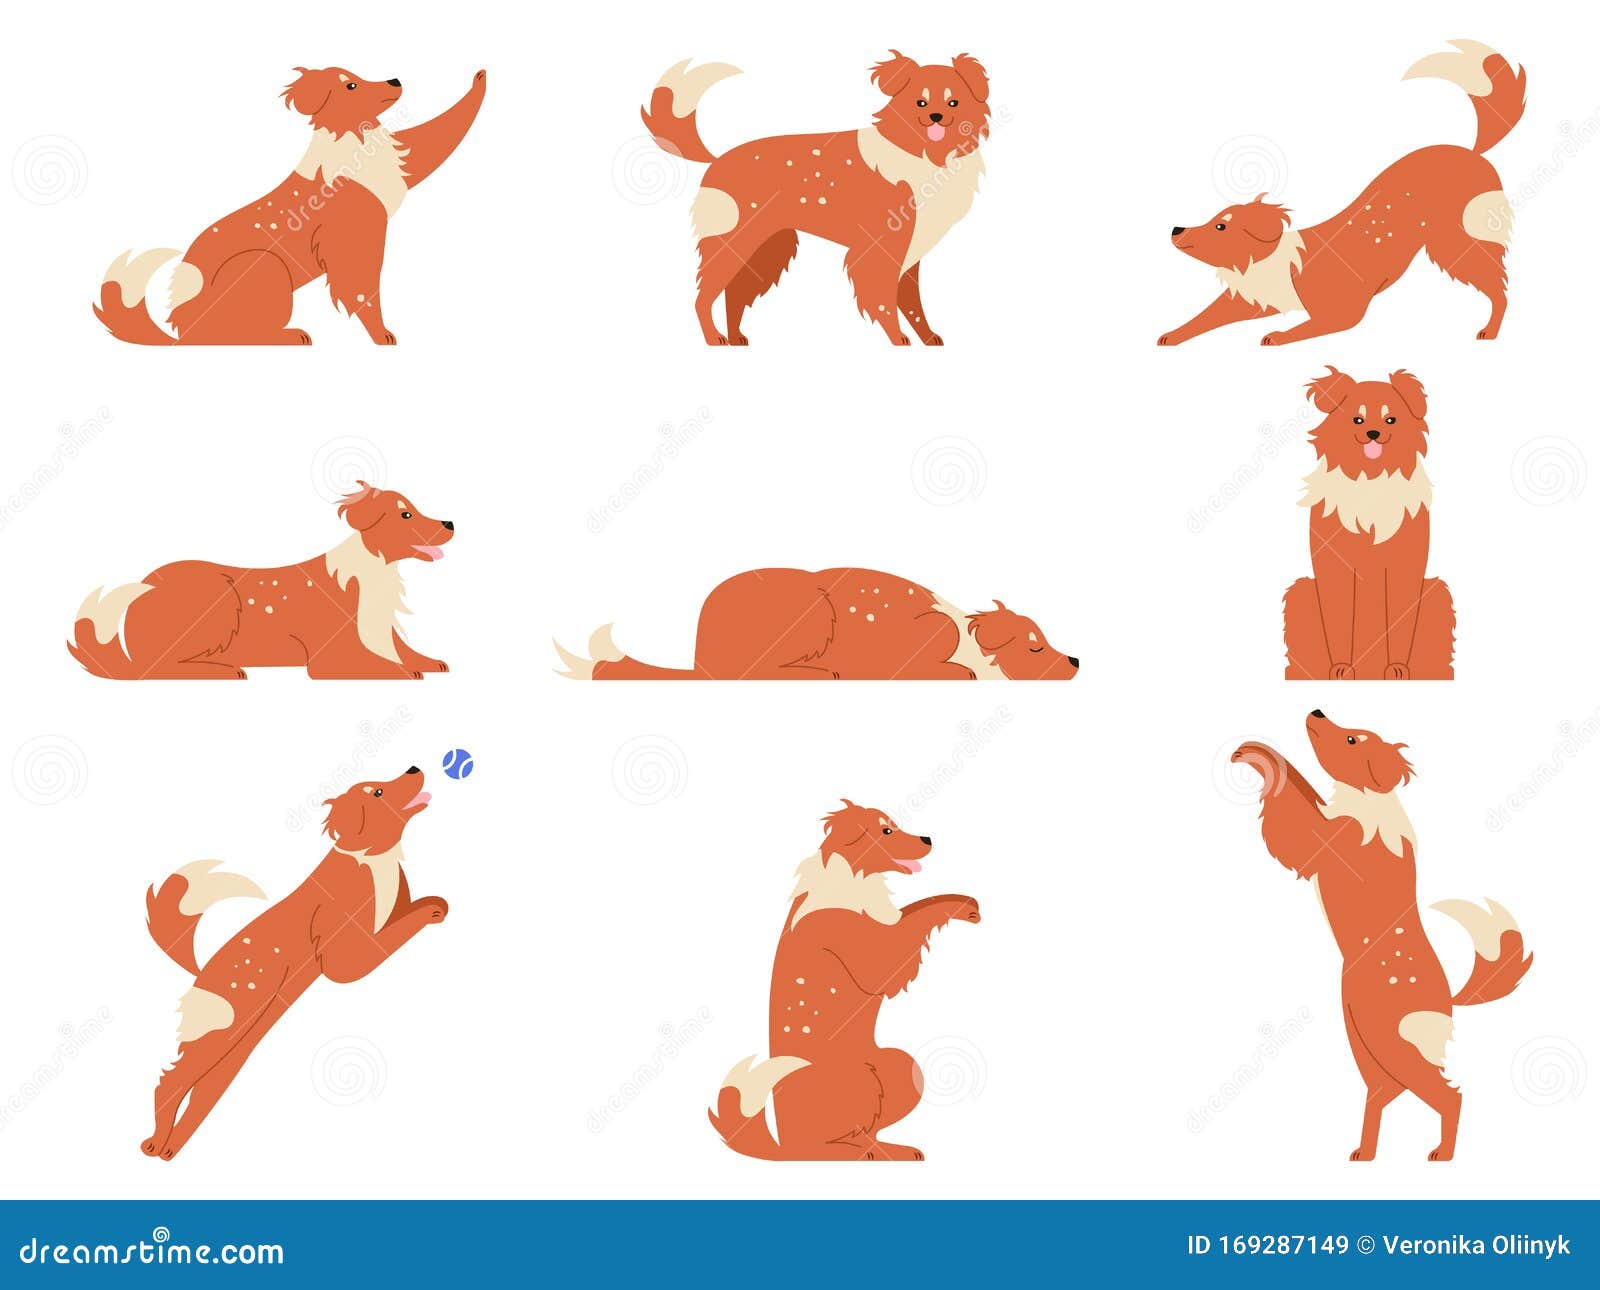 Dog Movement. Funny Dogs Activities, Cute Animal Character in Various Poses  Running, Playing and Sleeping Stock Vector - Illustration of jogging,  happy: 169287149